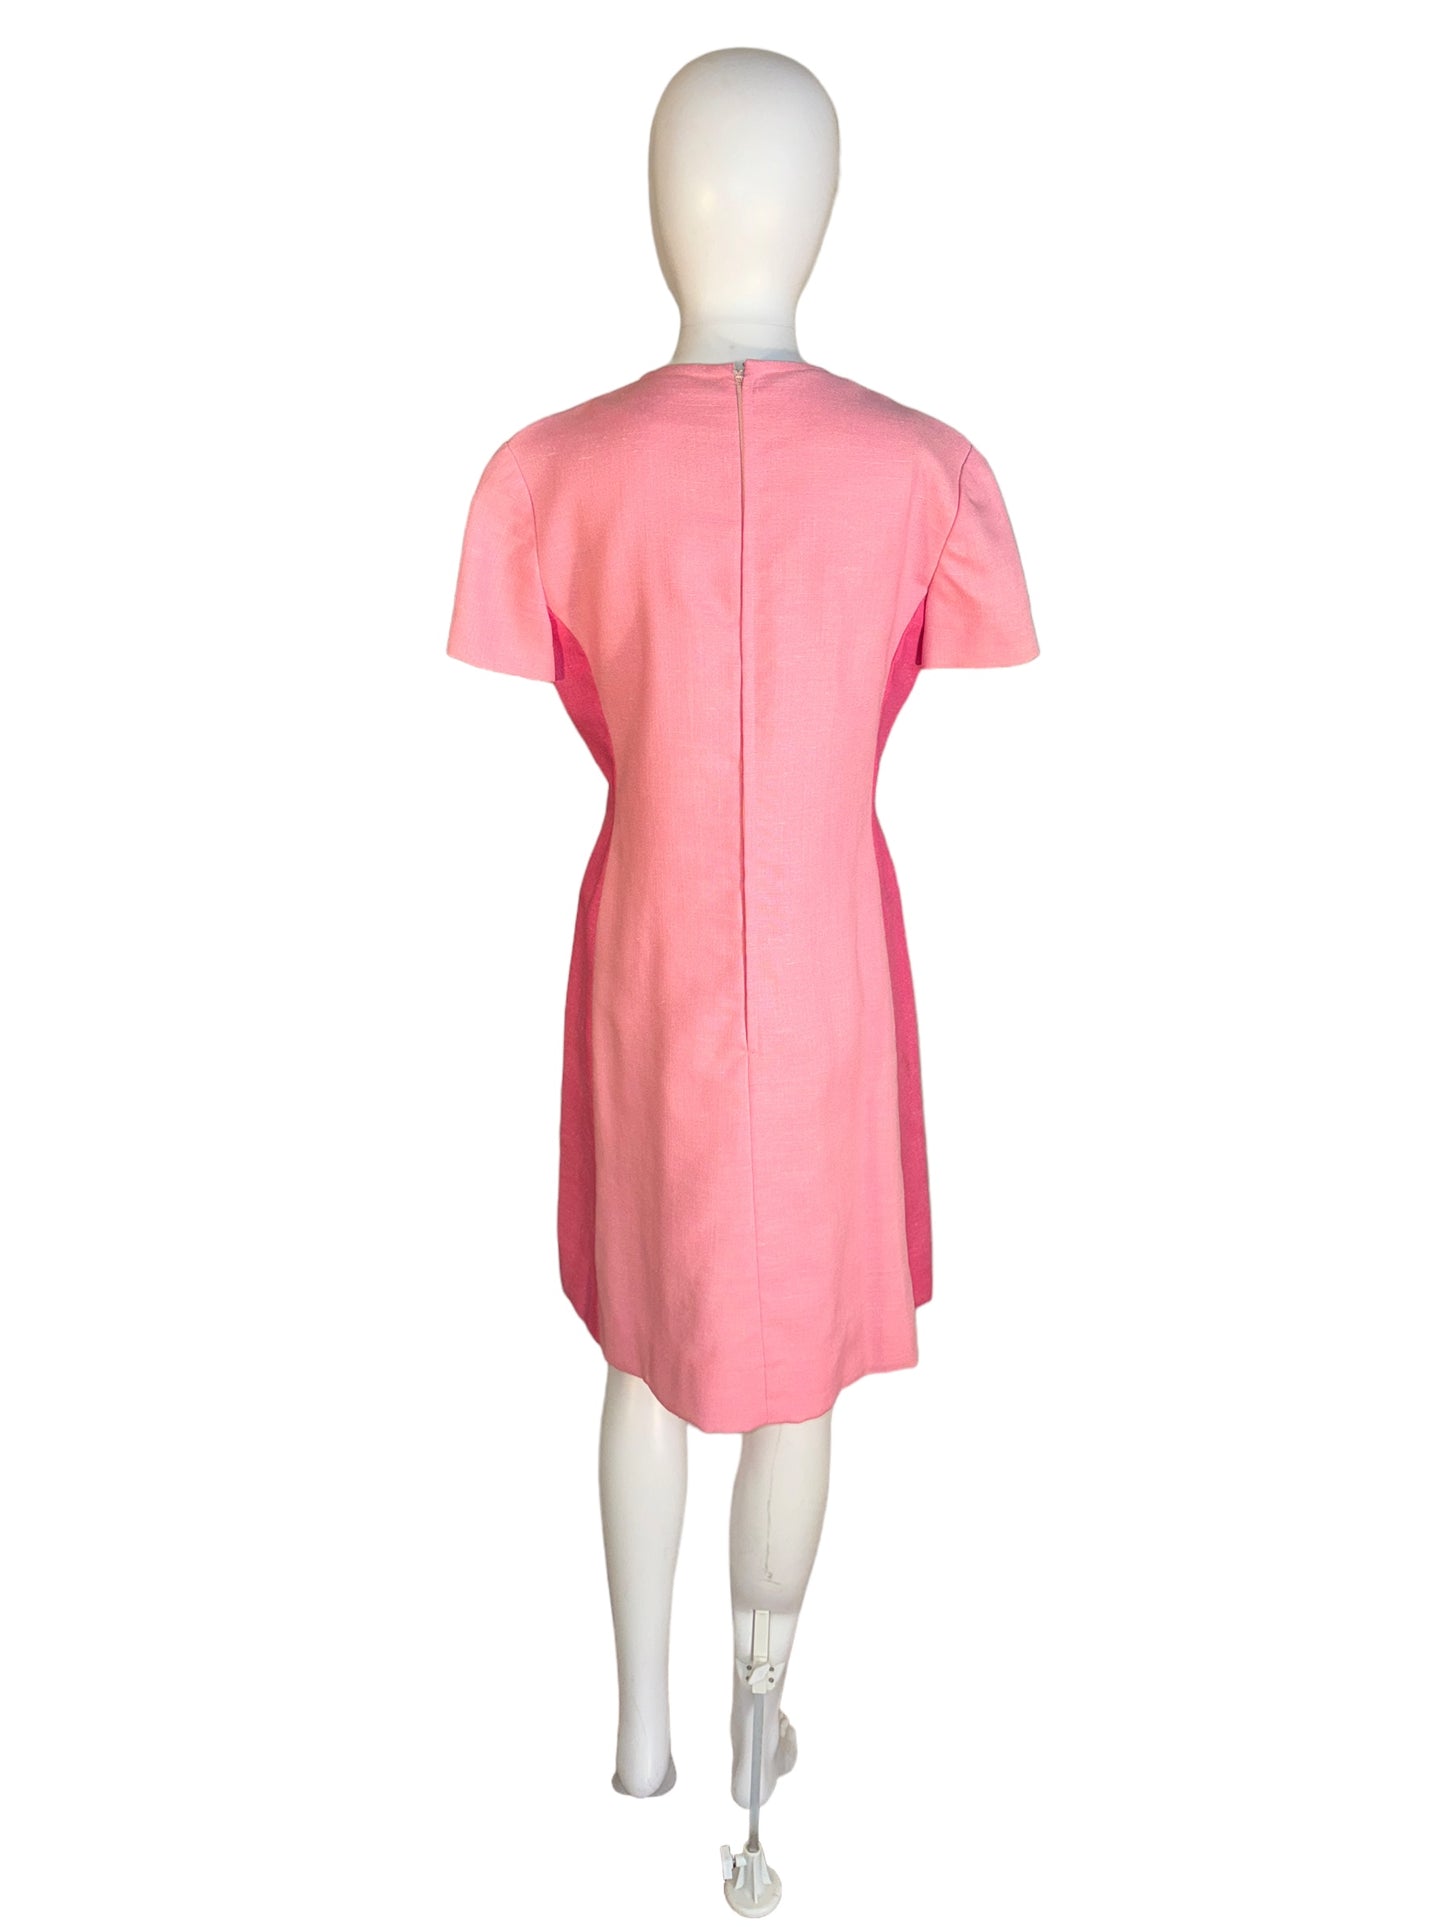 Vintage 1970s Dress Two Tone Pink w Lucite Buttons